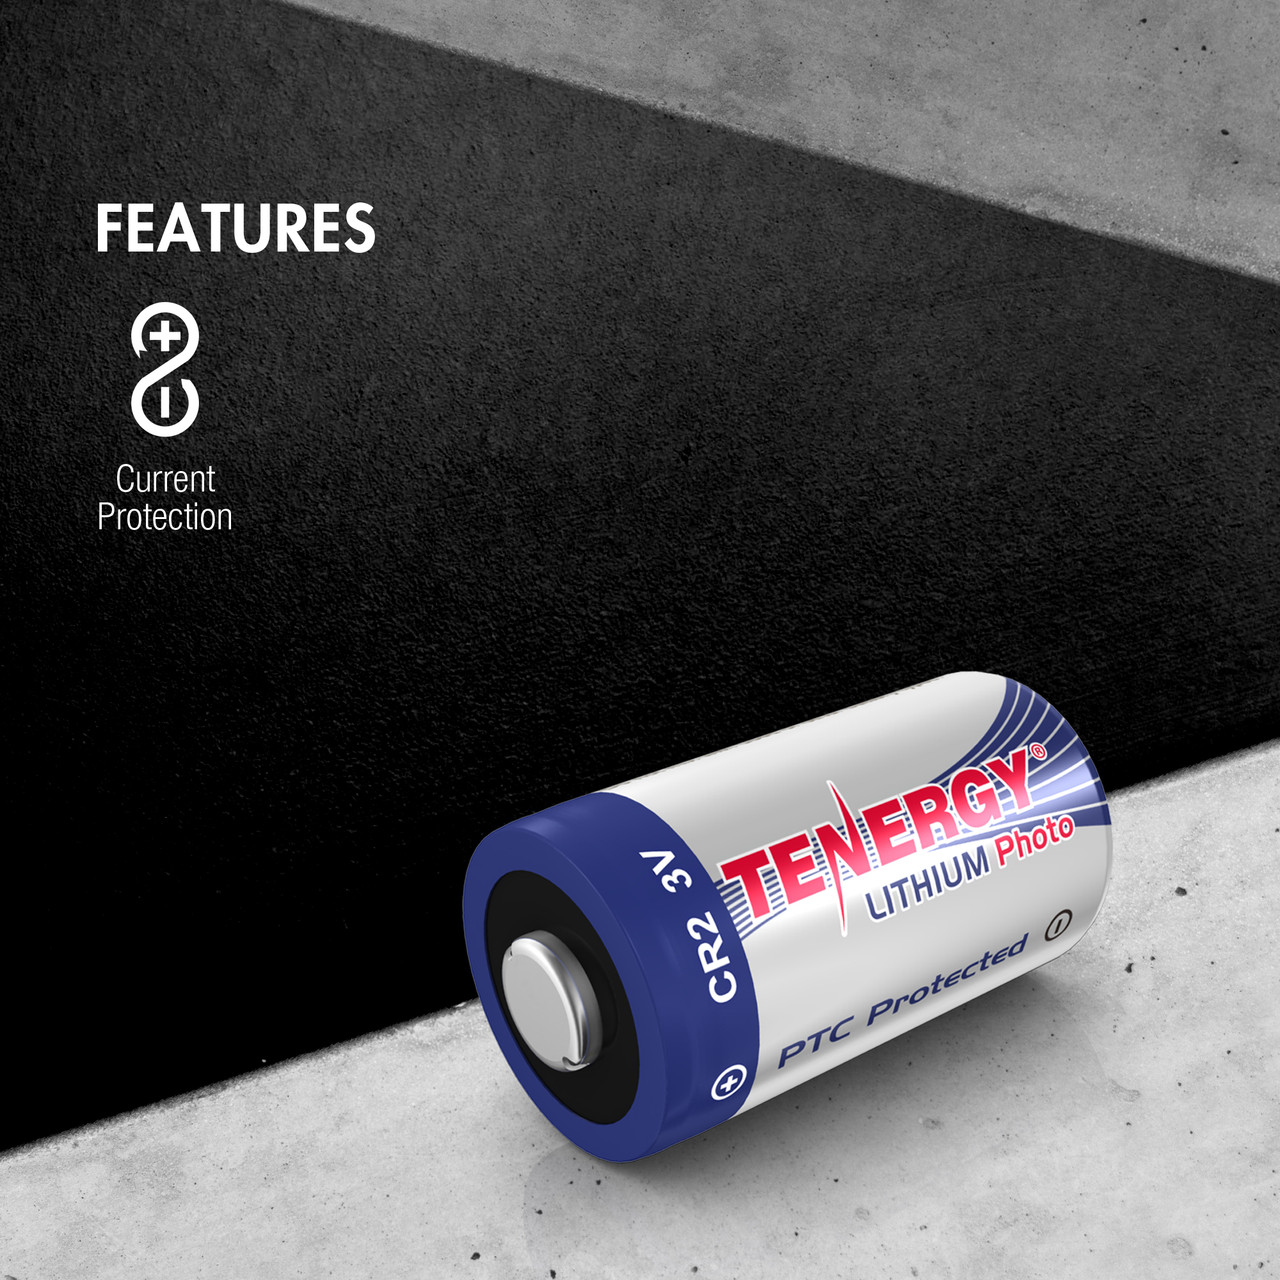 20 Pcs Tenergy Propel CR2 3V Lithium Battery with PTC Protection